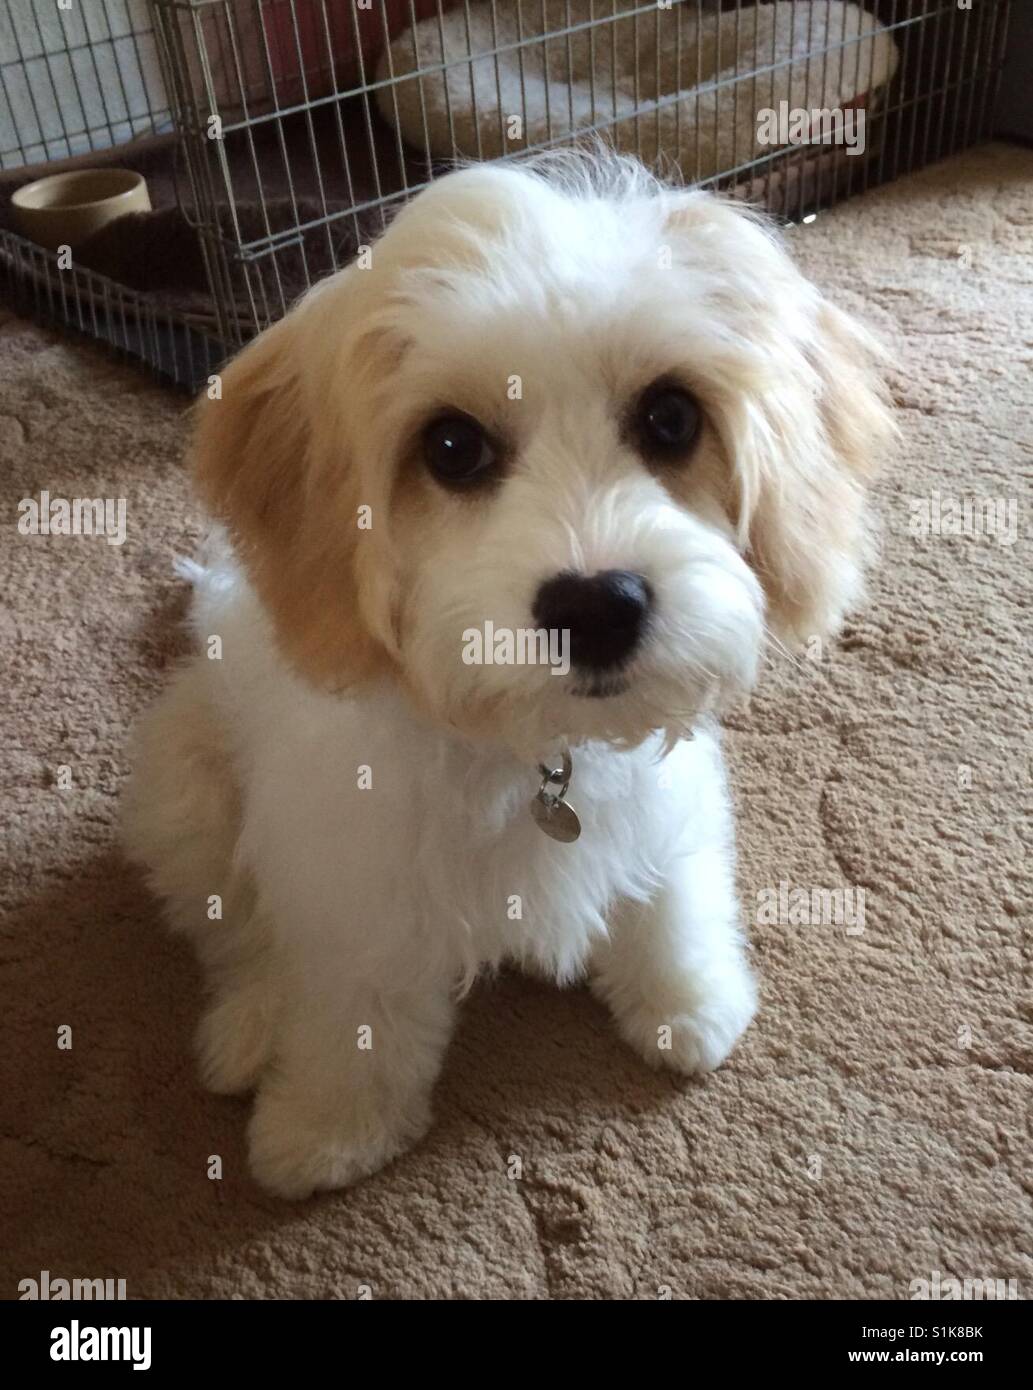 Cute Cavachon puppy looking like a cuddly toy Stock Photo - Alamy